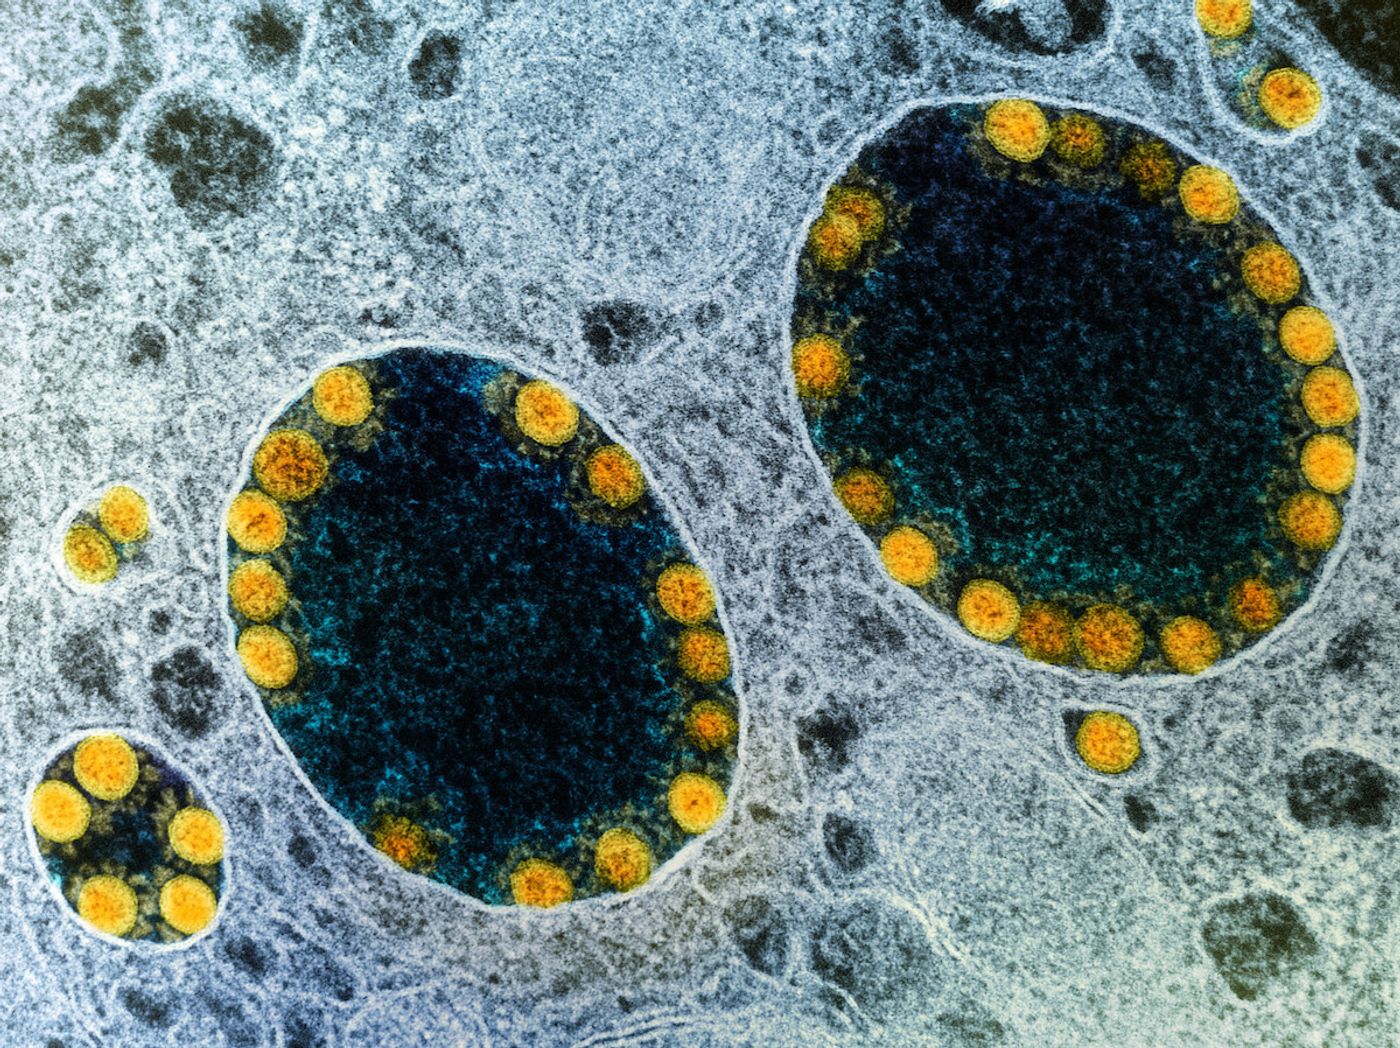 Transmission electron micrograph of SARS-CoV-2 virus particles (yellow) within endosomes of a heavily infected nasal Olfactory Epithelial Cell. Image captured at the NIAID Integrated Research Facility (IRF) in Fort Detrick, Maryland. Credit: NIAID